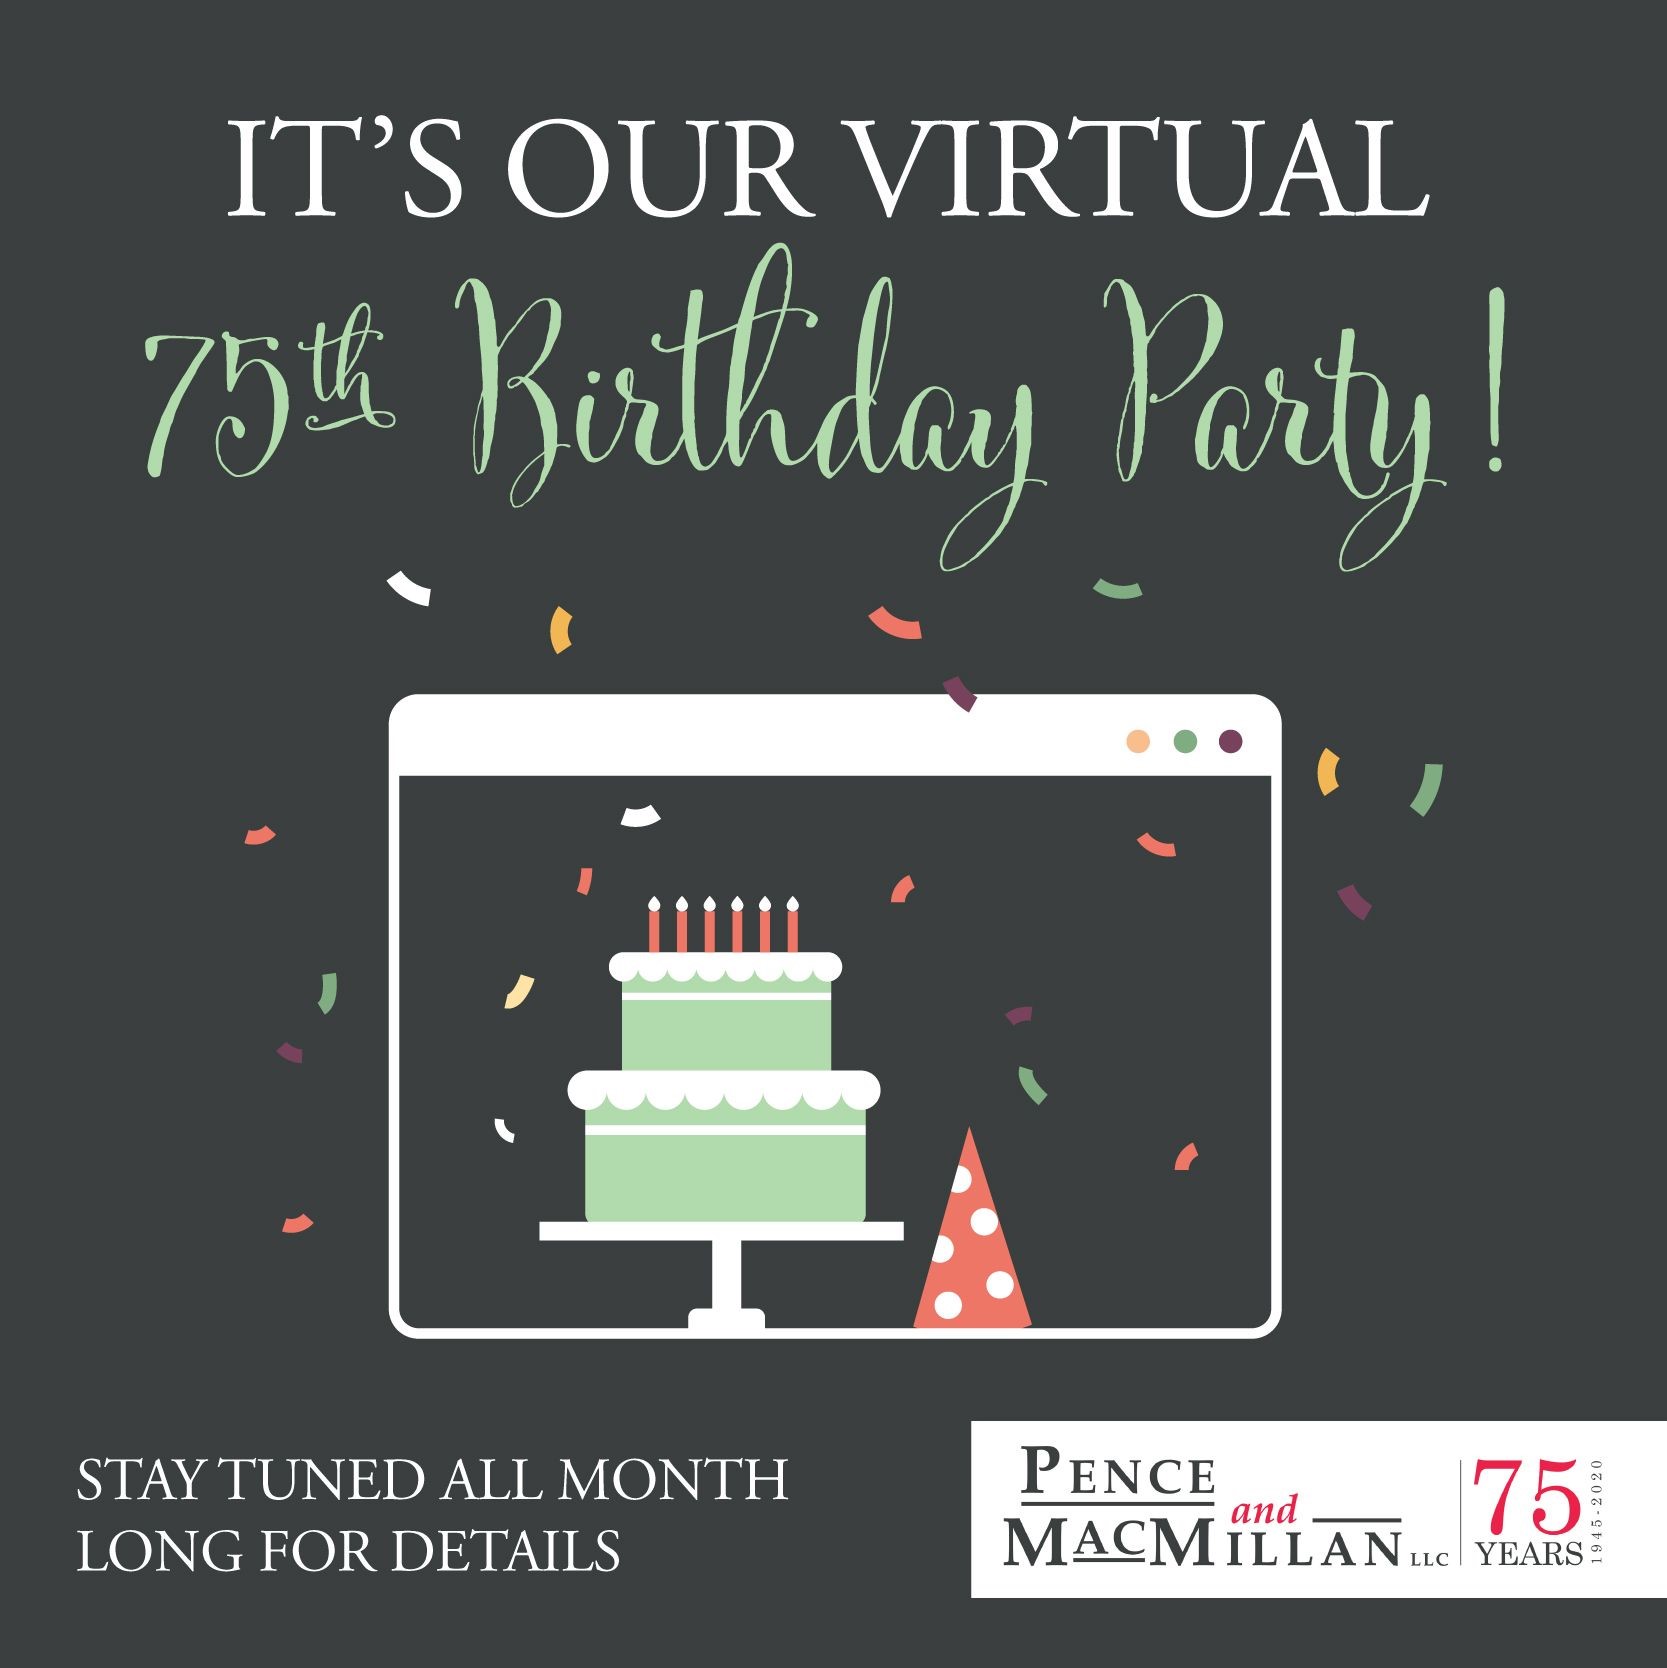 It's our virtual 75th birthday party! Stay tuned all month long for details.